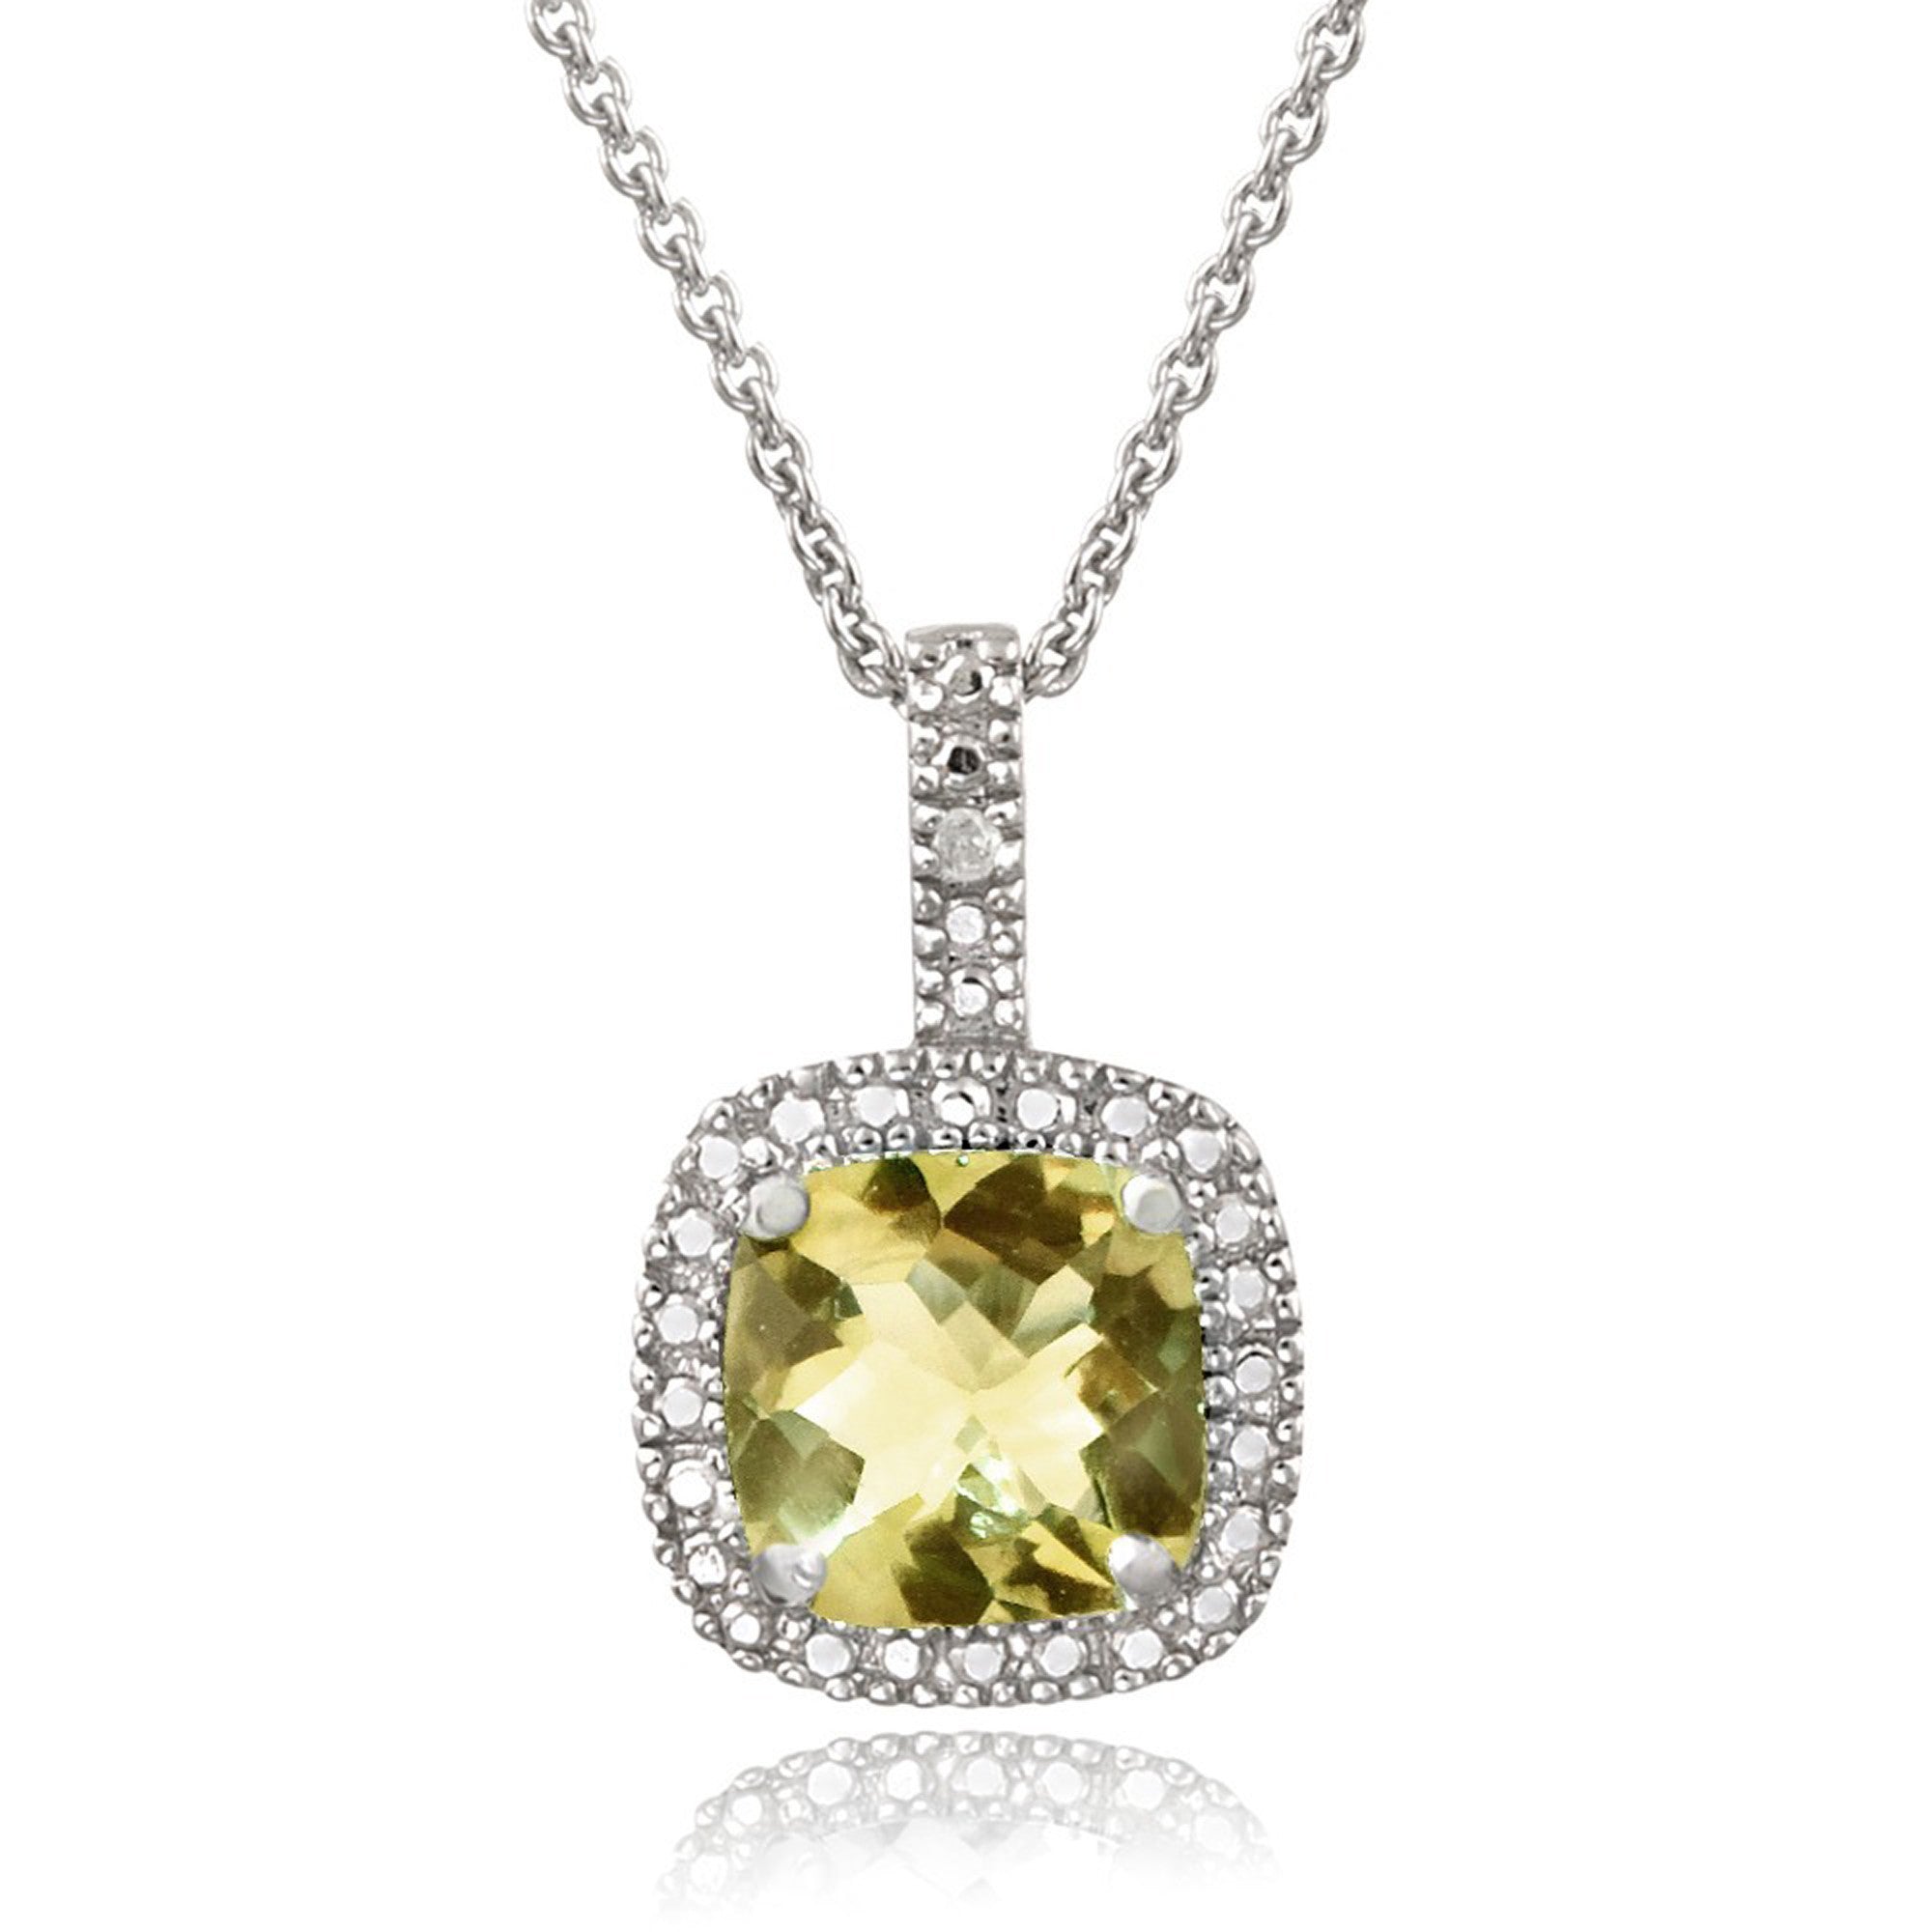 Square Necklace With Gemstone & Diamond Accents in Sterling Silver - Citrine